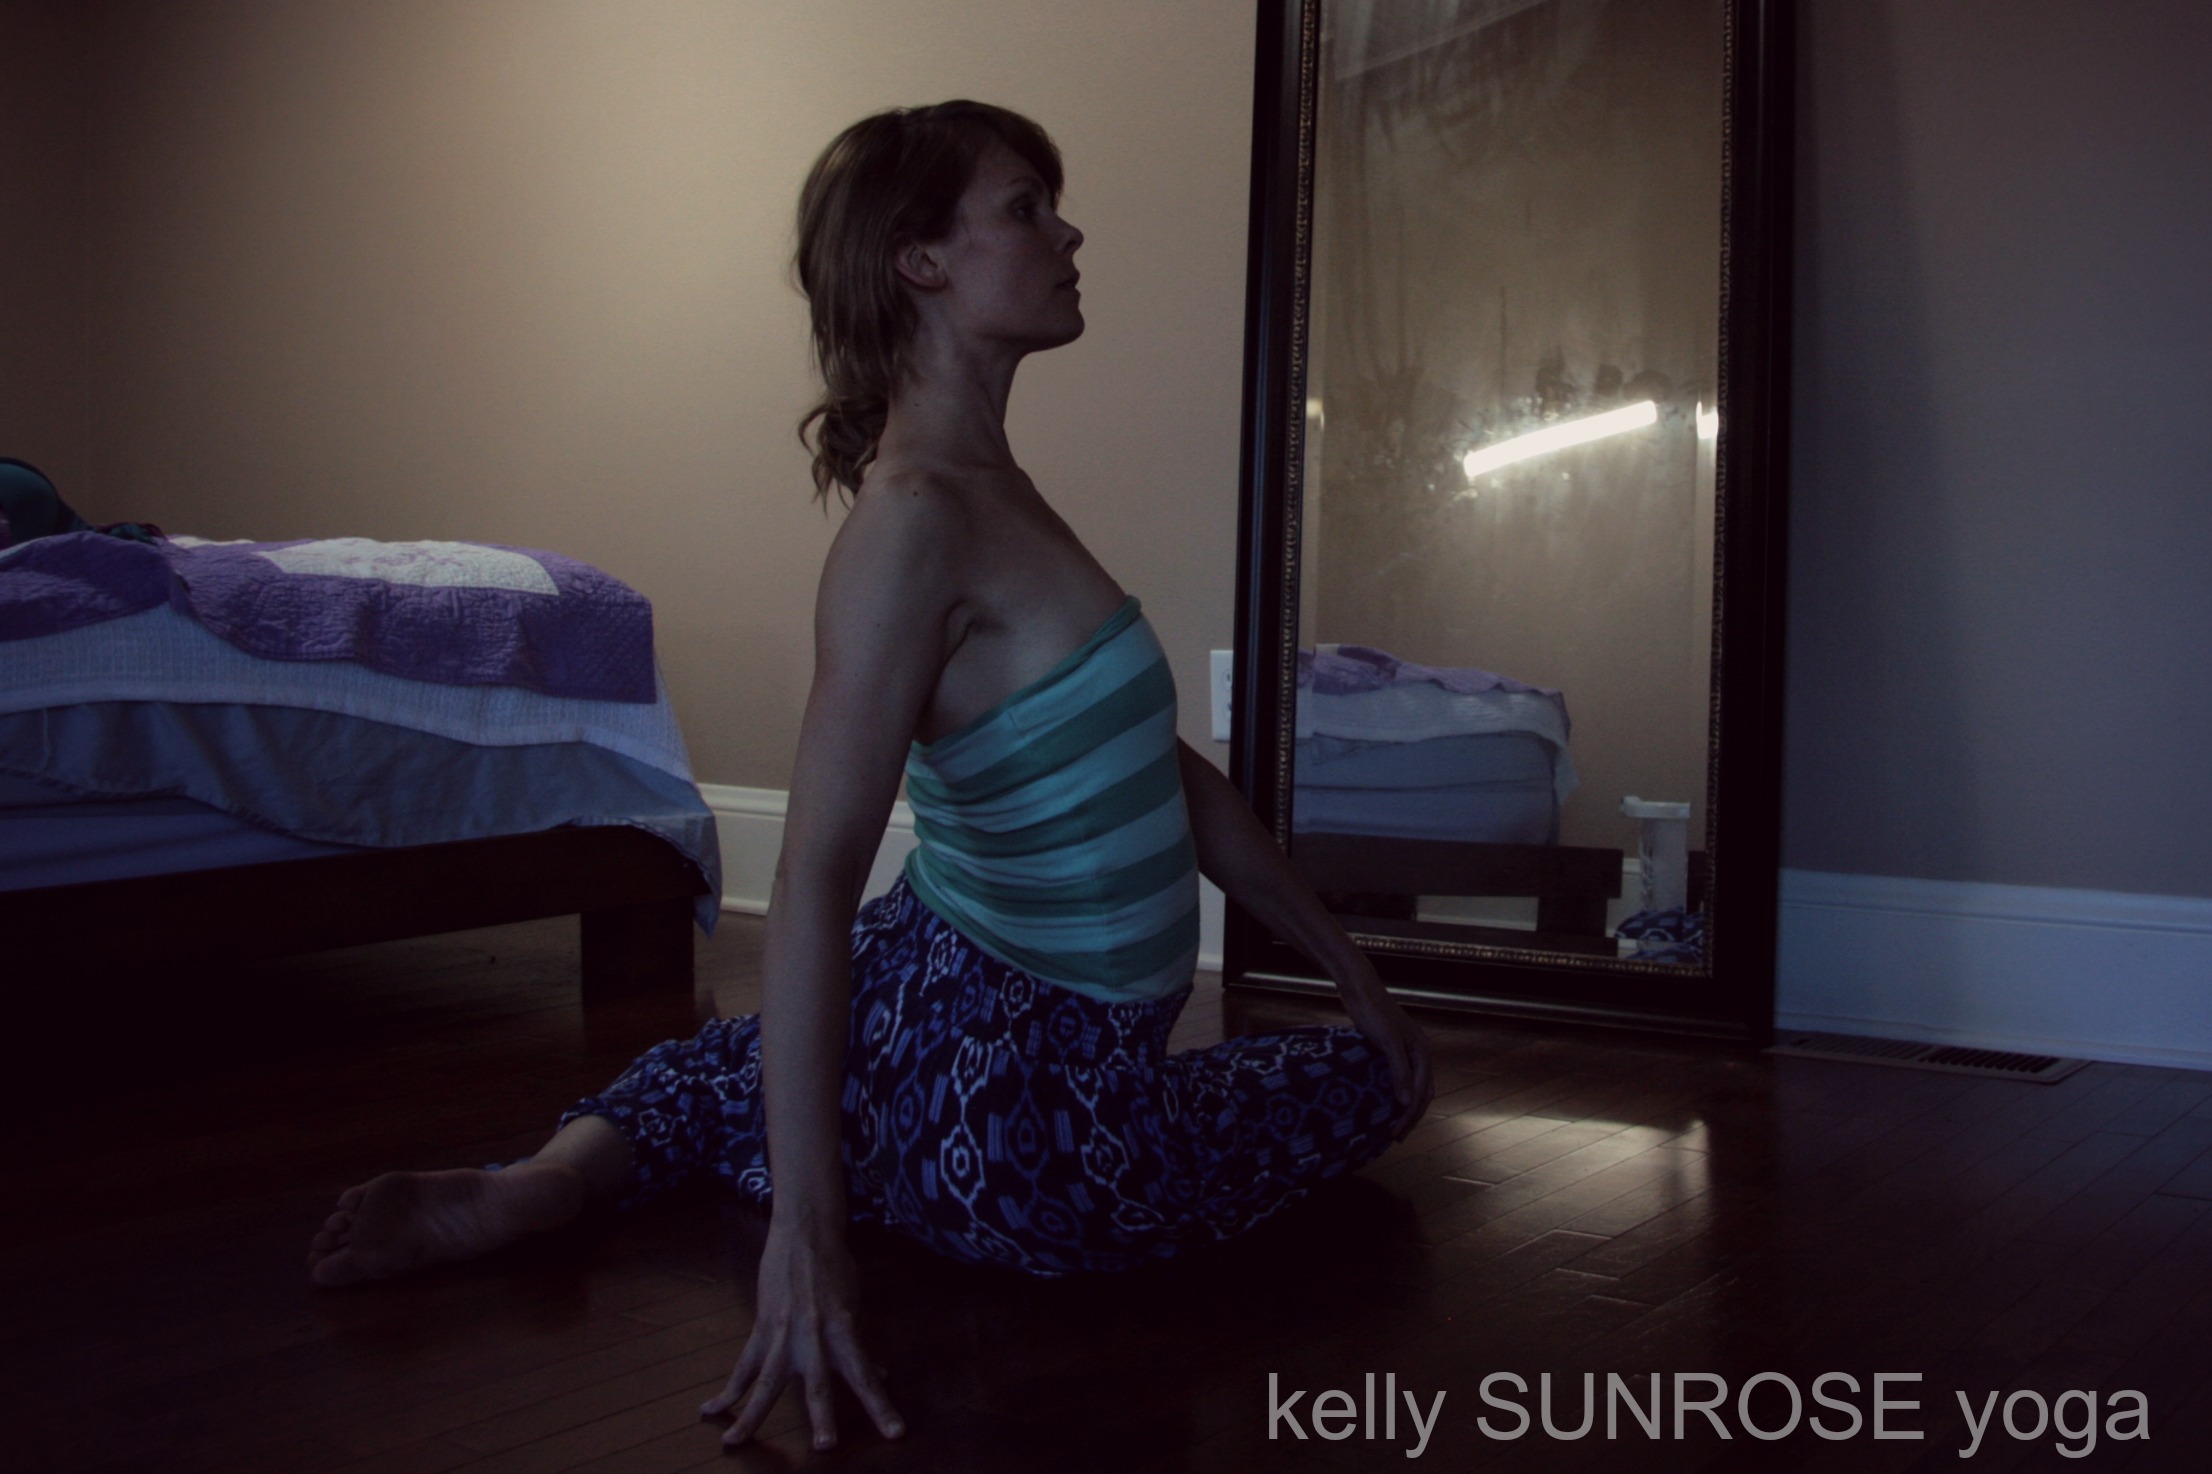 Kelly Sunrose shares full-length, subtle realm yoga classes on her podcast, Samadhi Rush. Join us for deep, spacious practice. Samadhi Rush// Online Yoga Classes with Kelly Sunrose, E-RYT